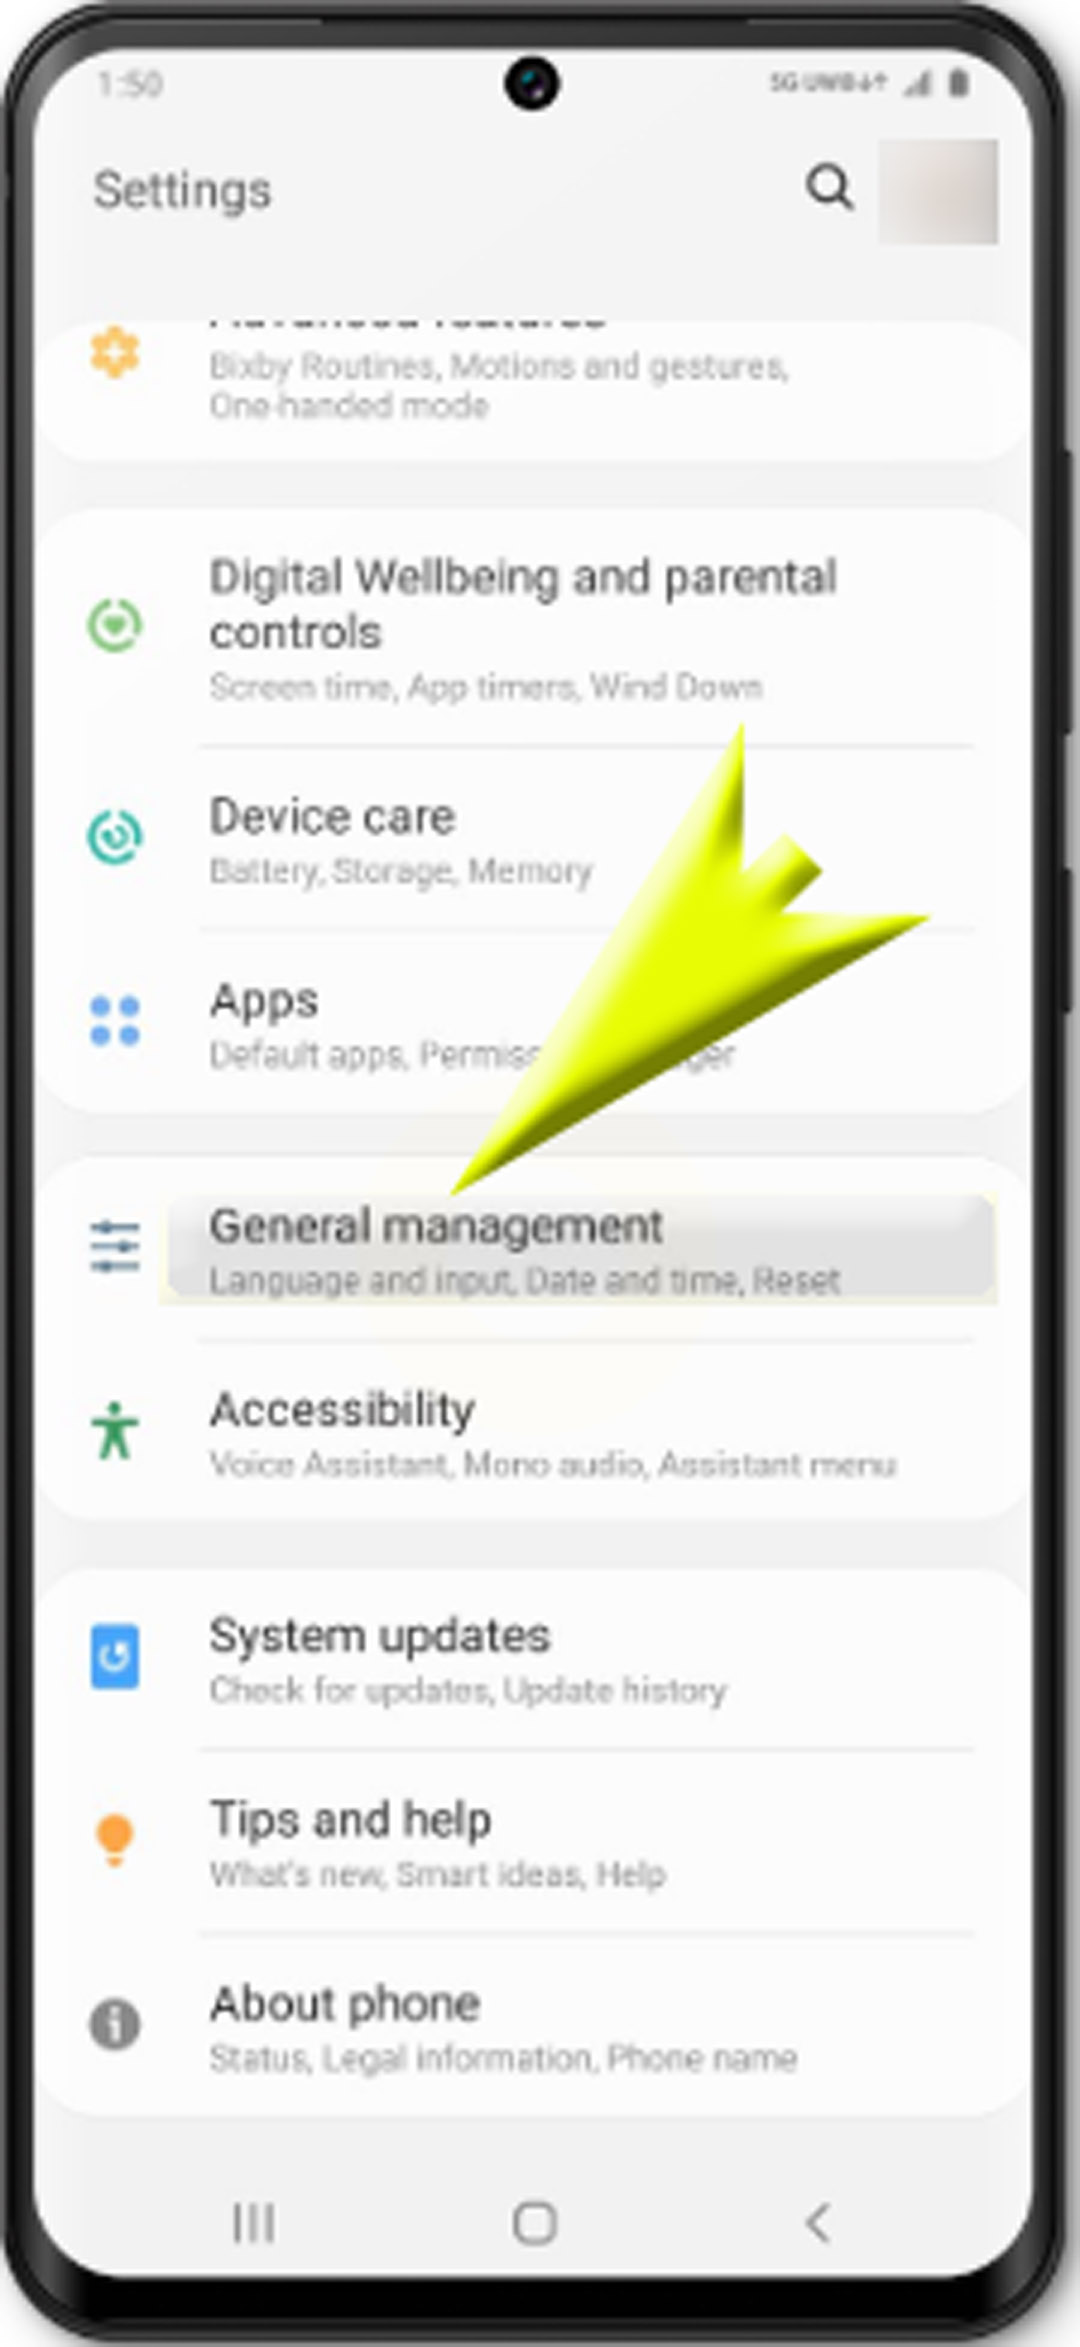 fix network problems on galaxy s20 - general management settings